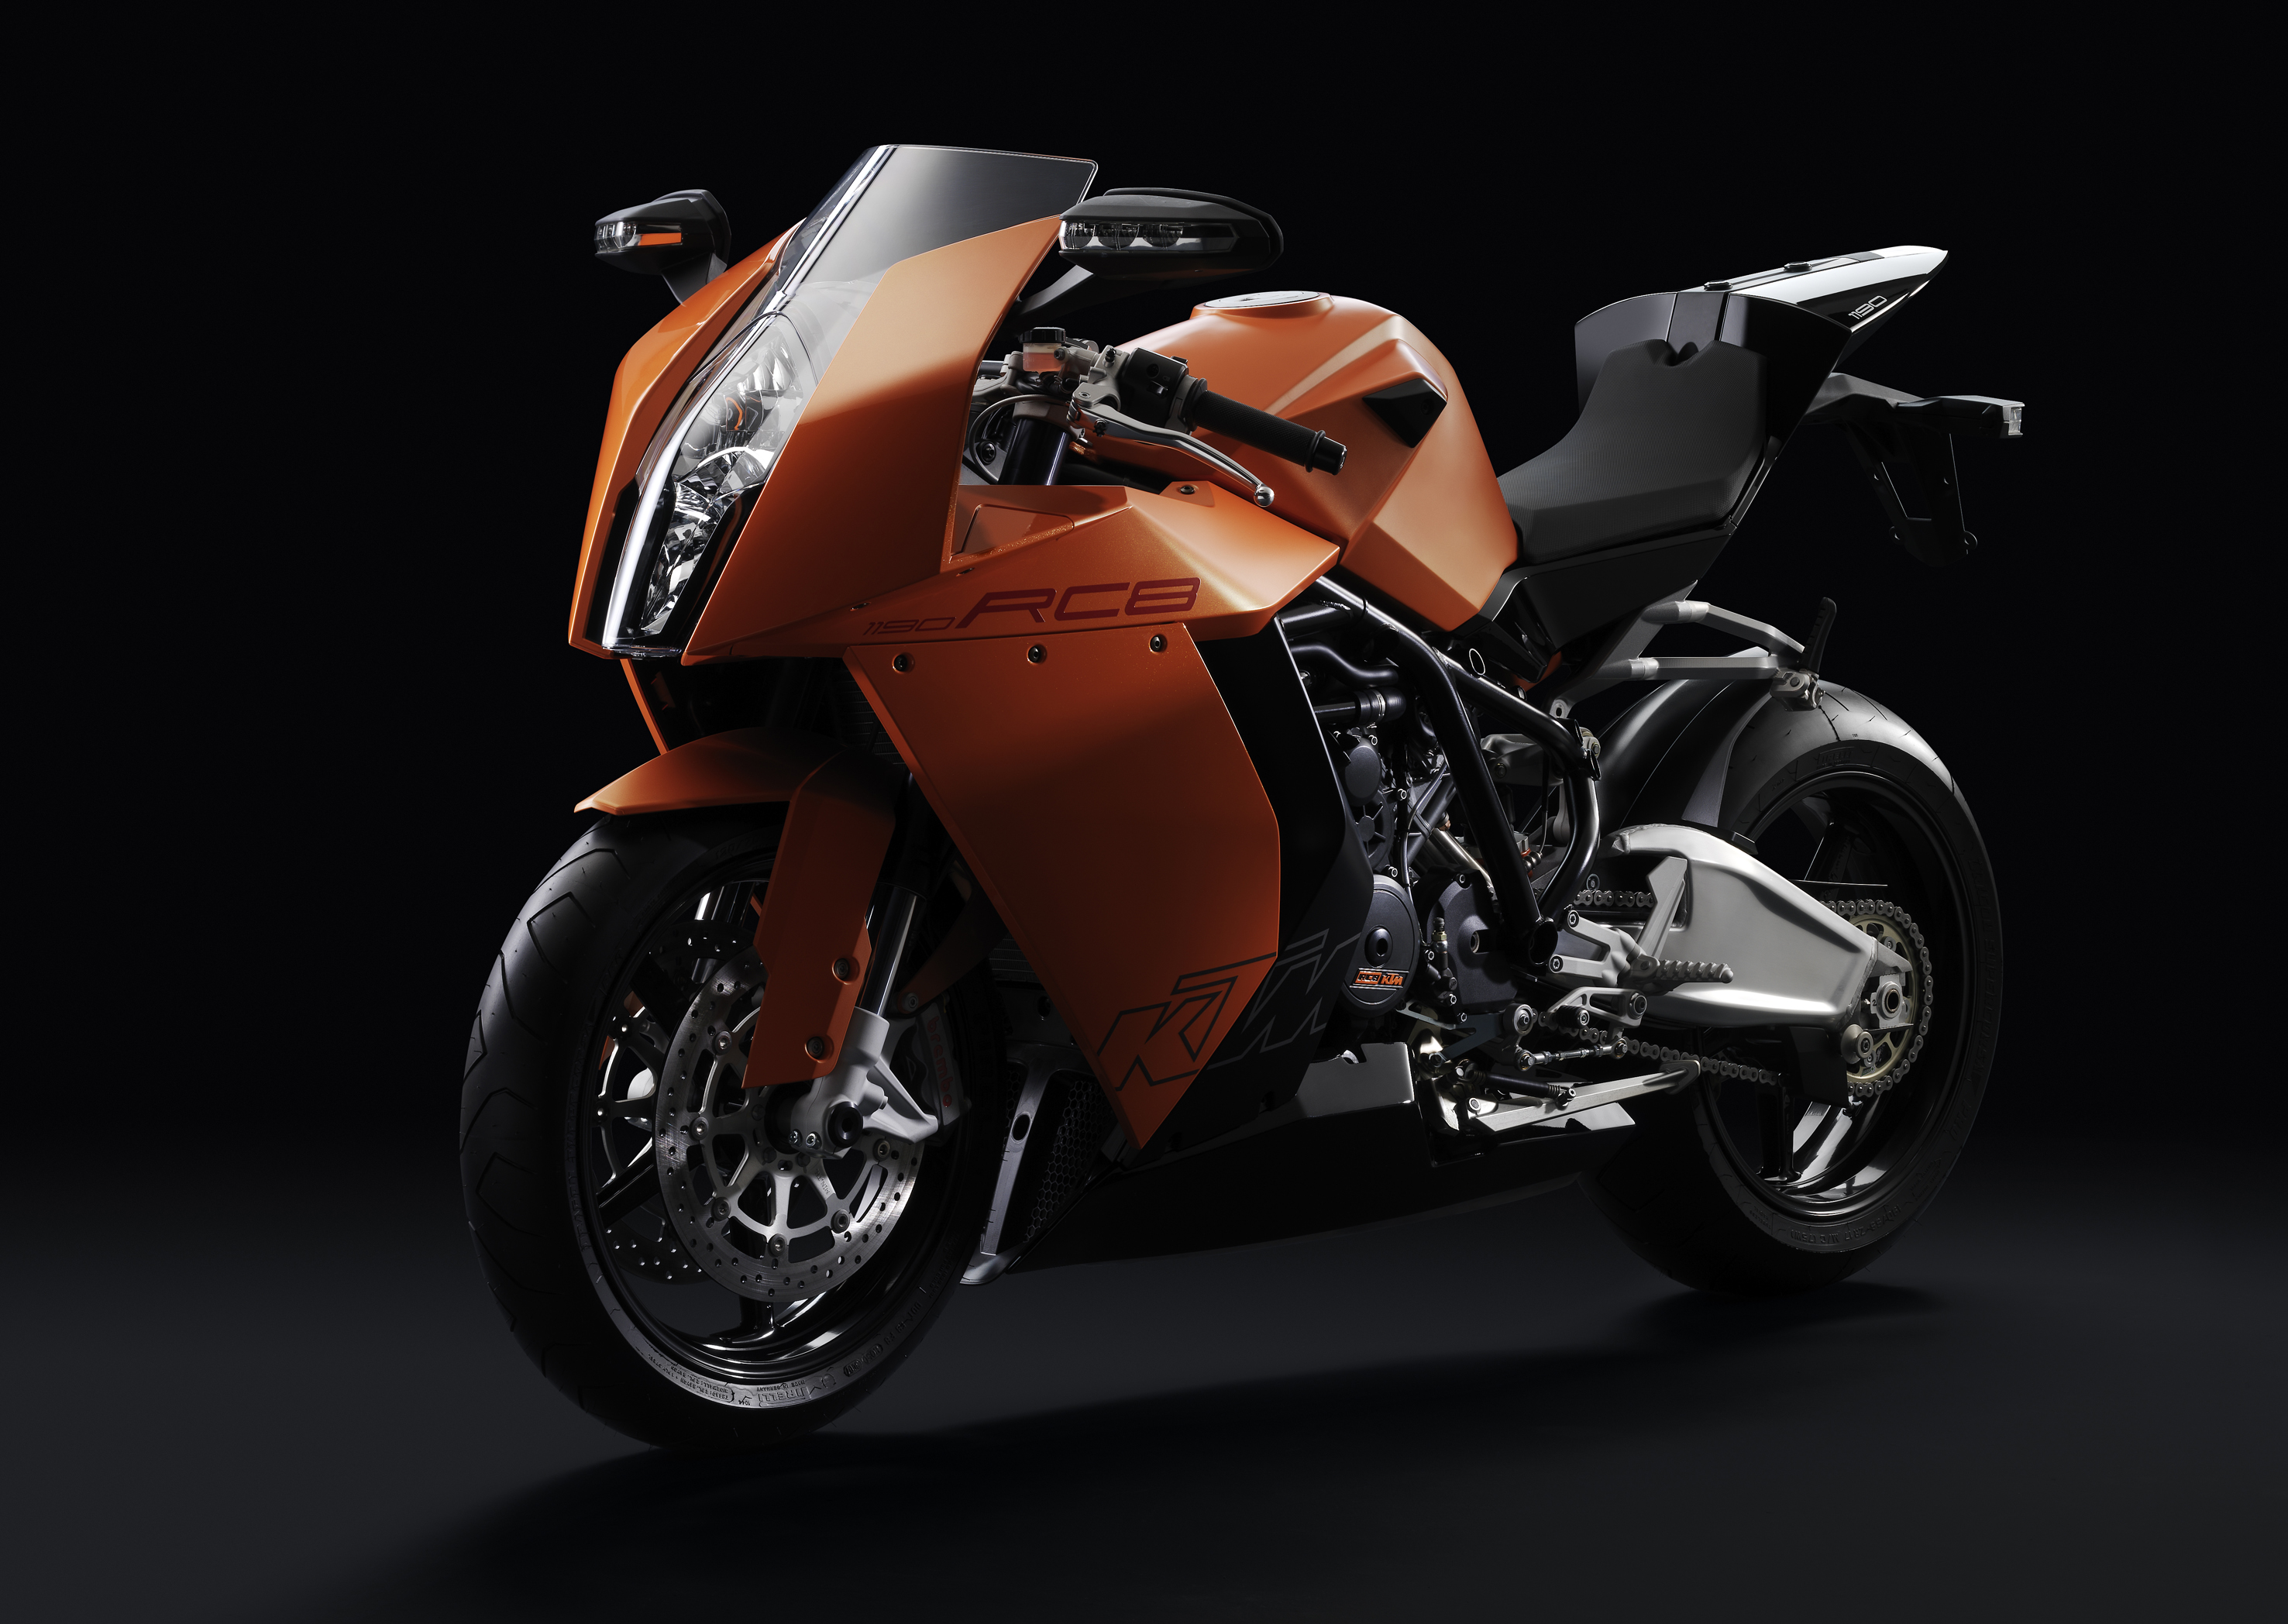 How much is a KTM rc8?